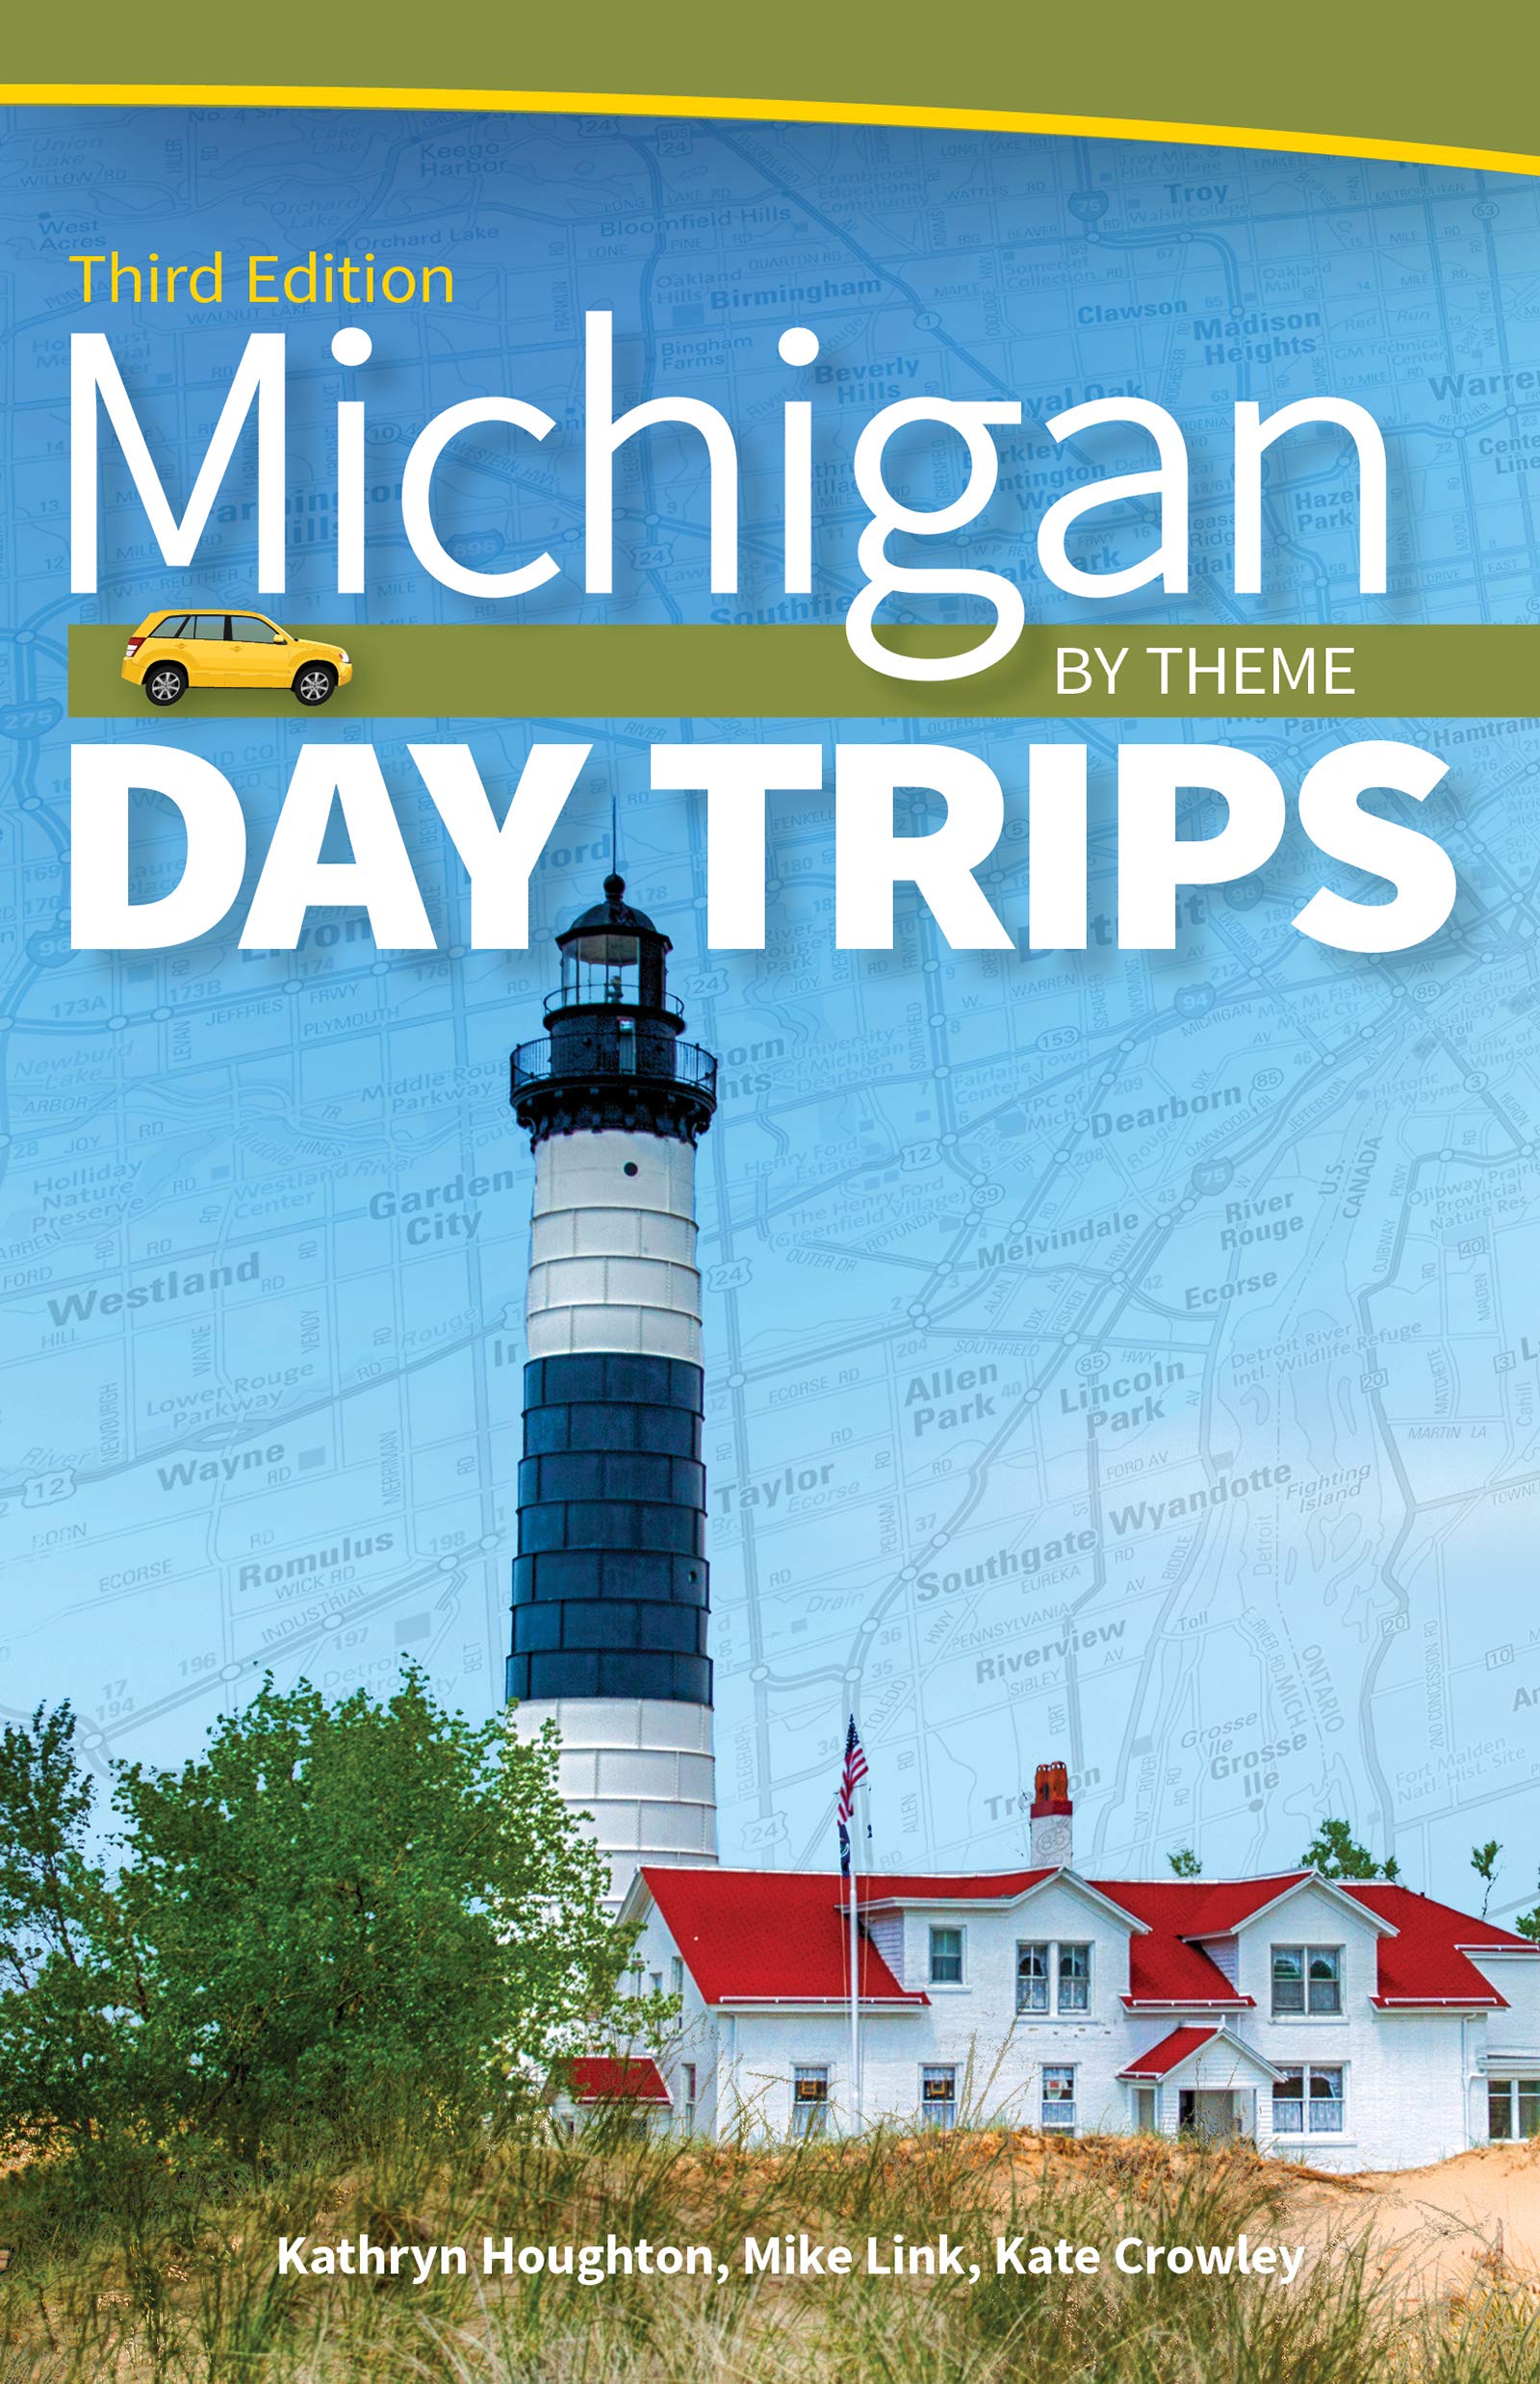 Lighthouse "Michigan Day Trips by Theme"